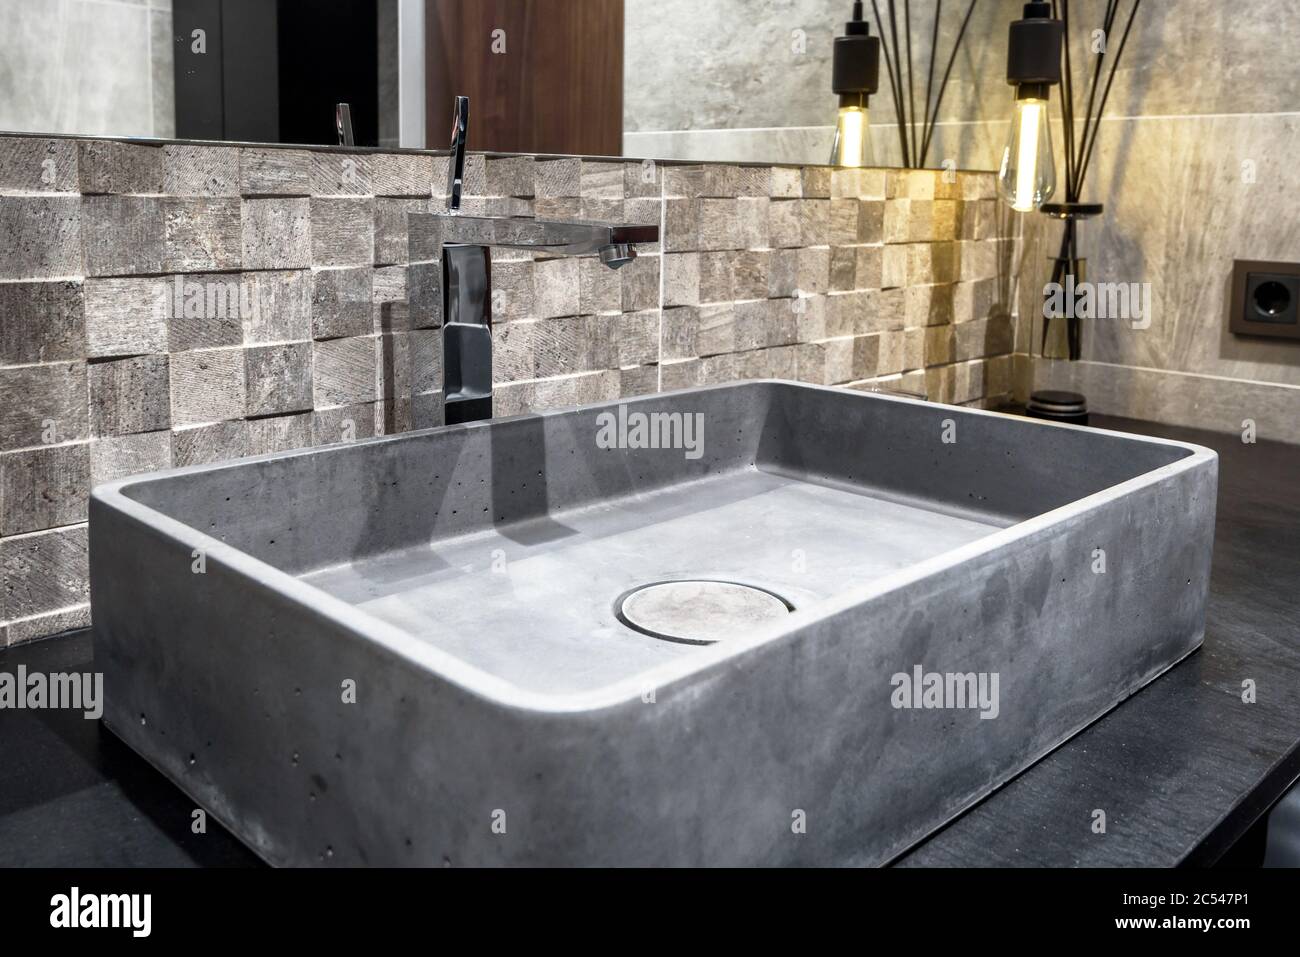 Moscow - March 25, 2018: Modern stylish restroom in a hotel or residential house. Interior design with concrete sink in the bathroom. Contemporary min Stock Photo